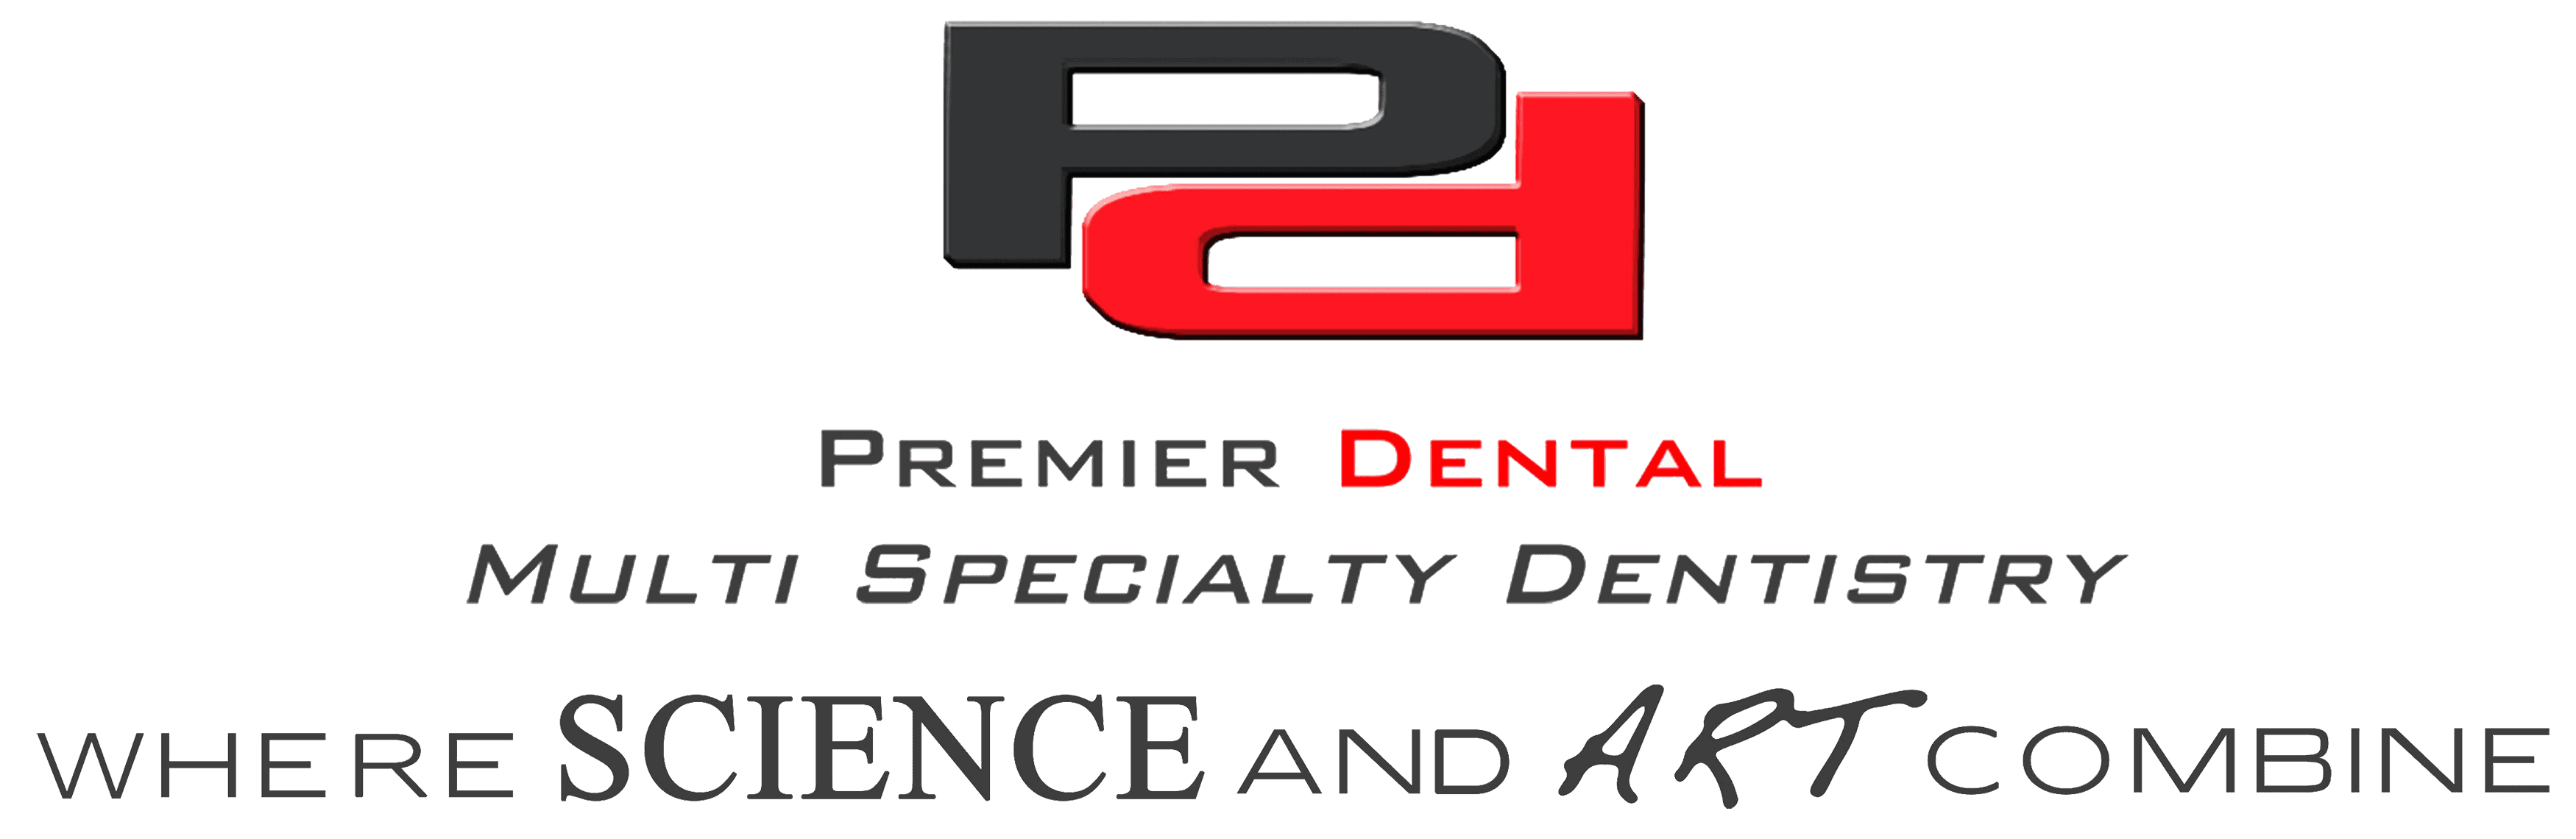 Visit Premier Dental of Quincy and Milton